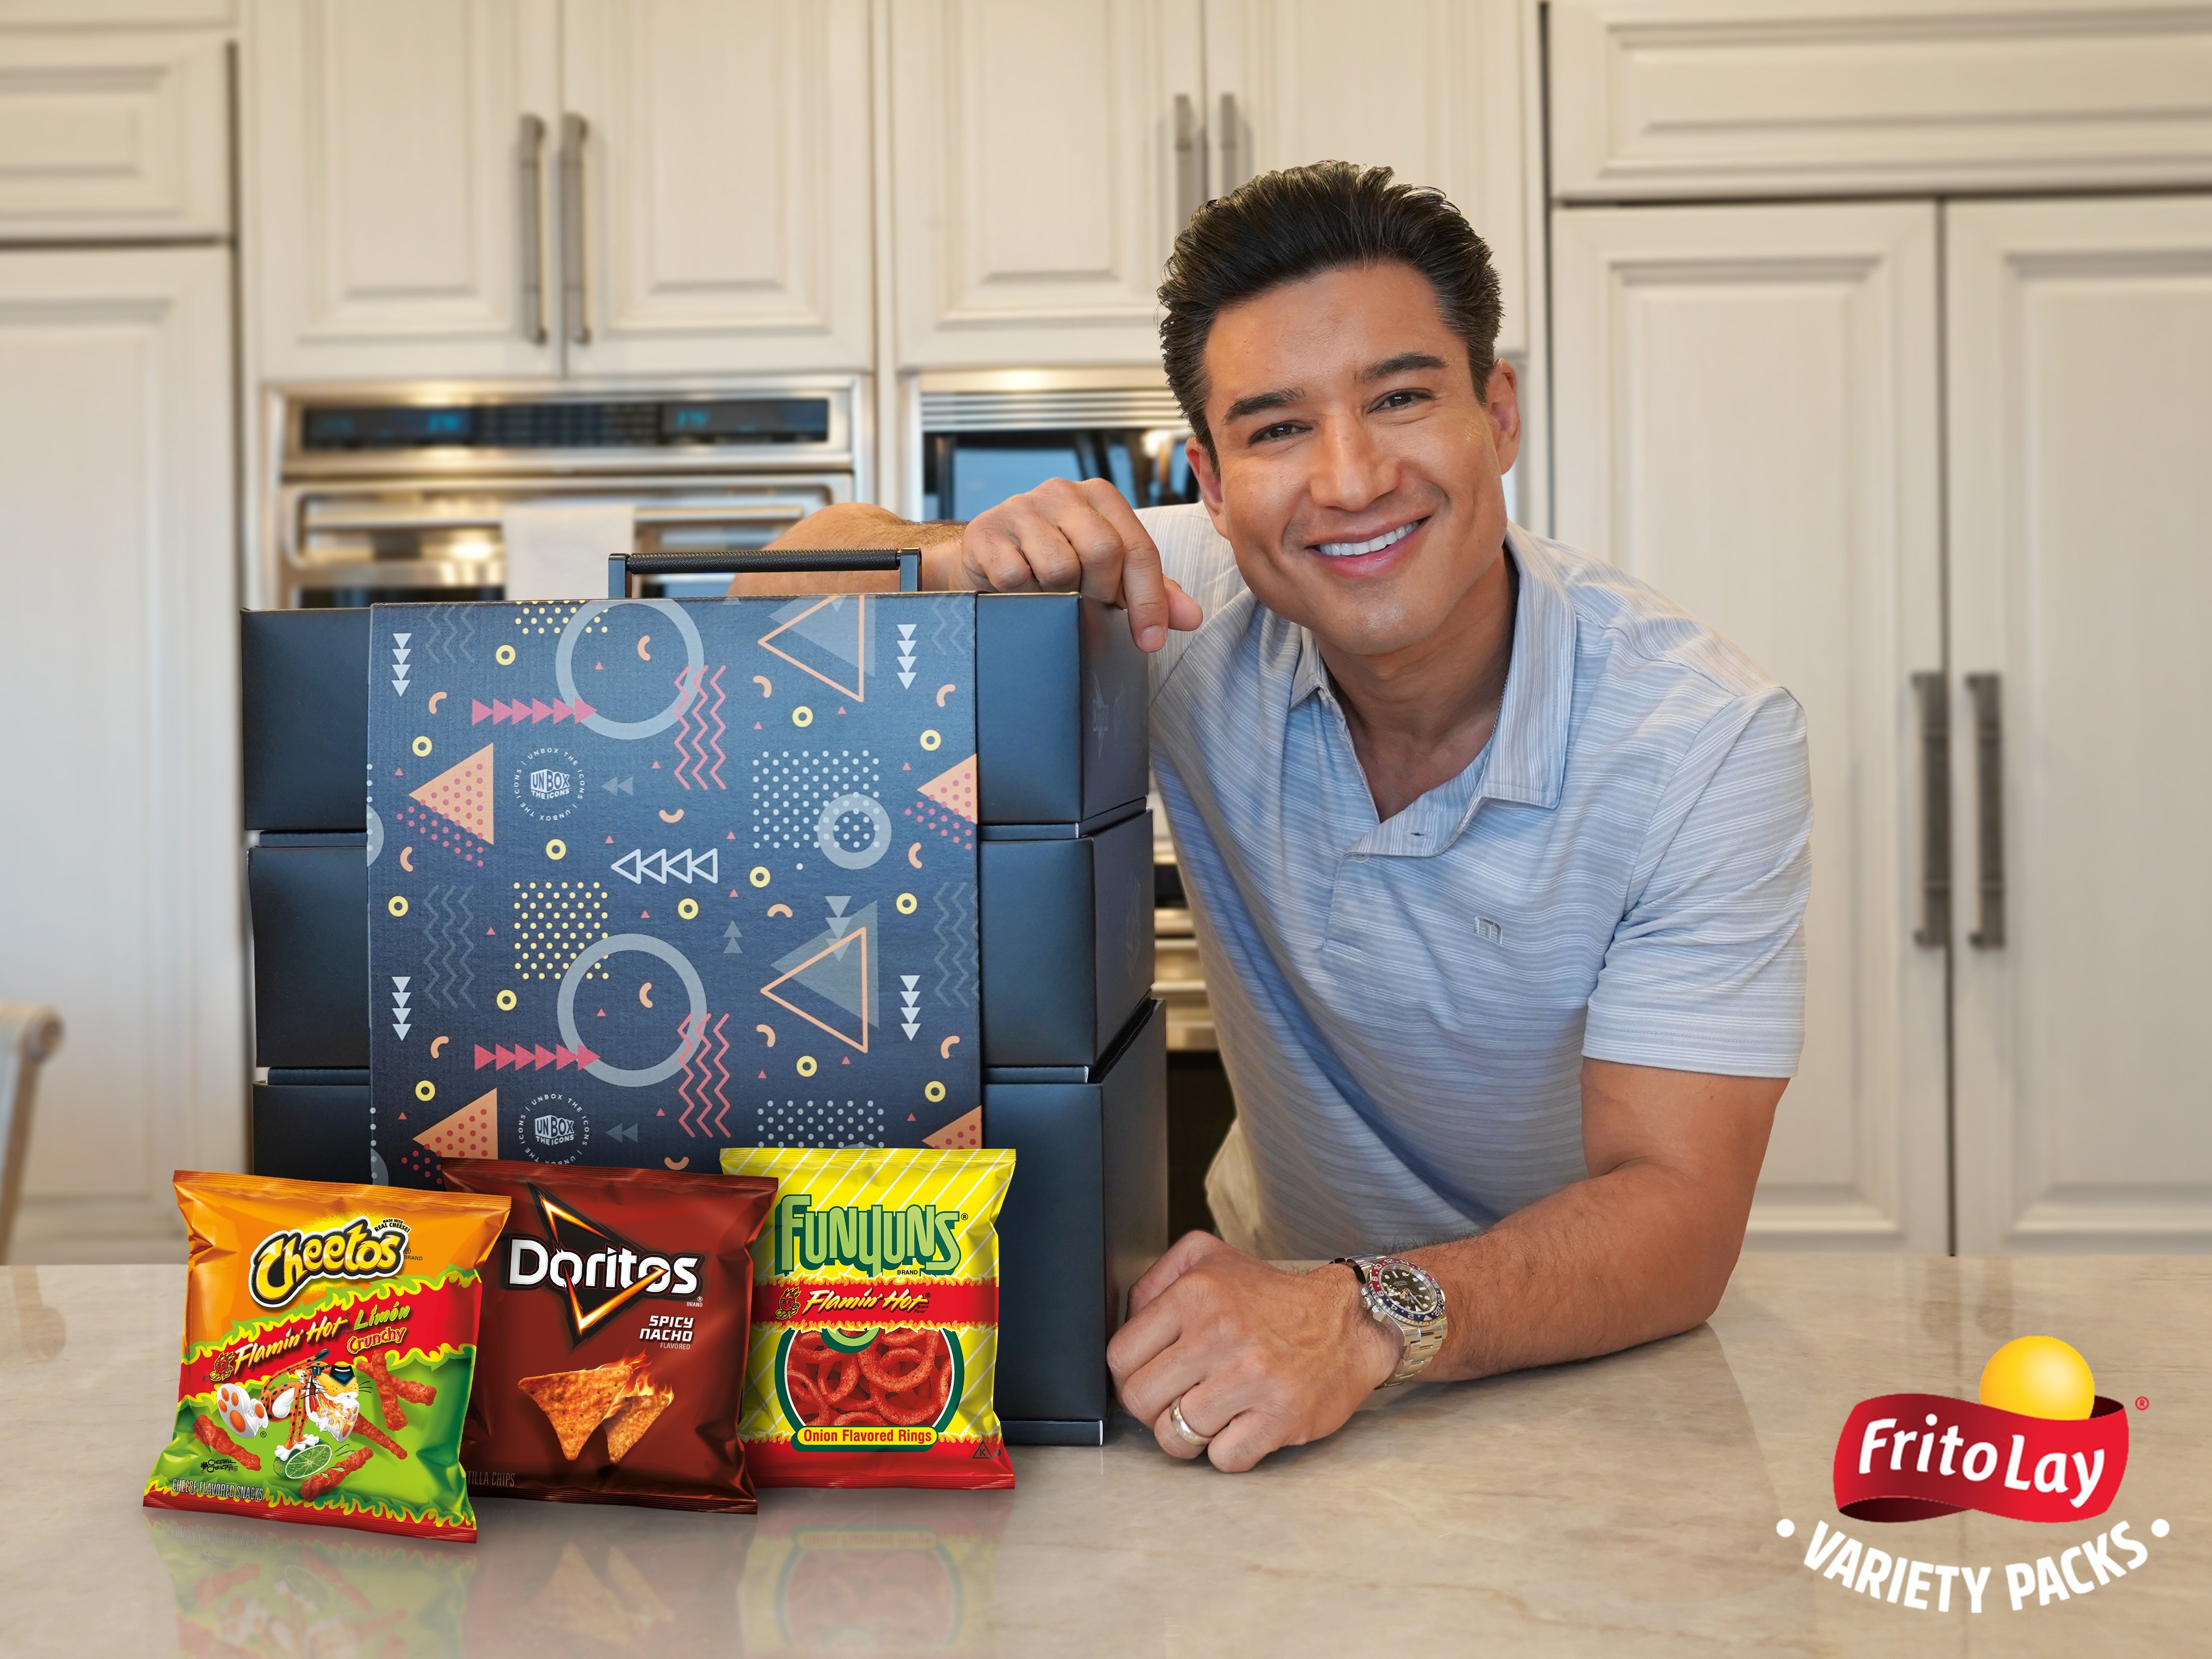 Mario Lopez smiling and showing off his exclusive Frito-Lay Variety Pack "Unbox the Icons" box